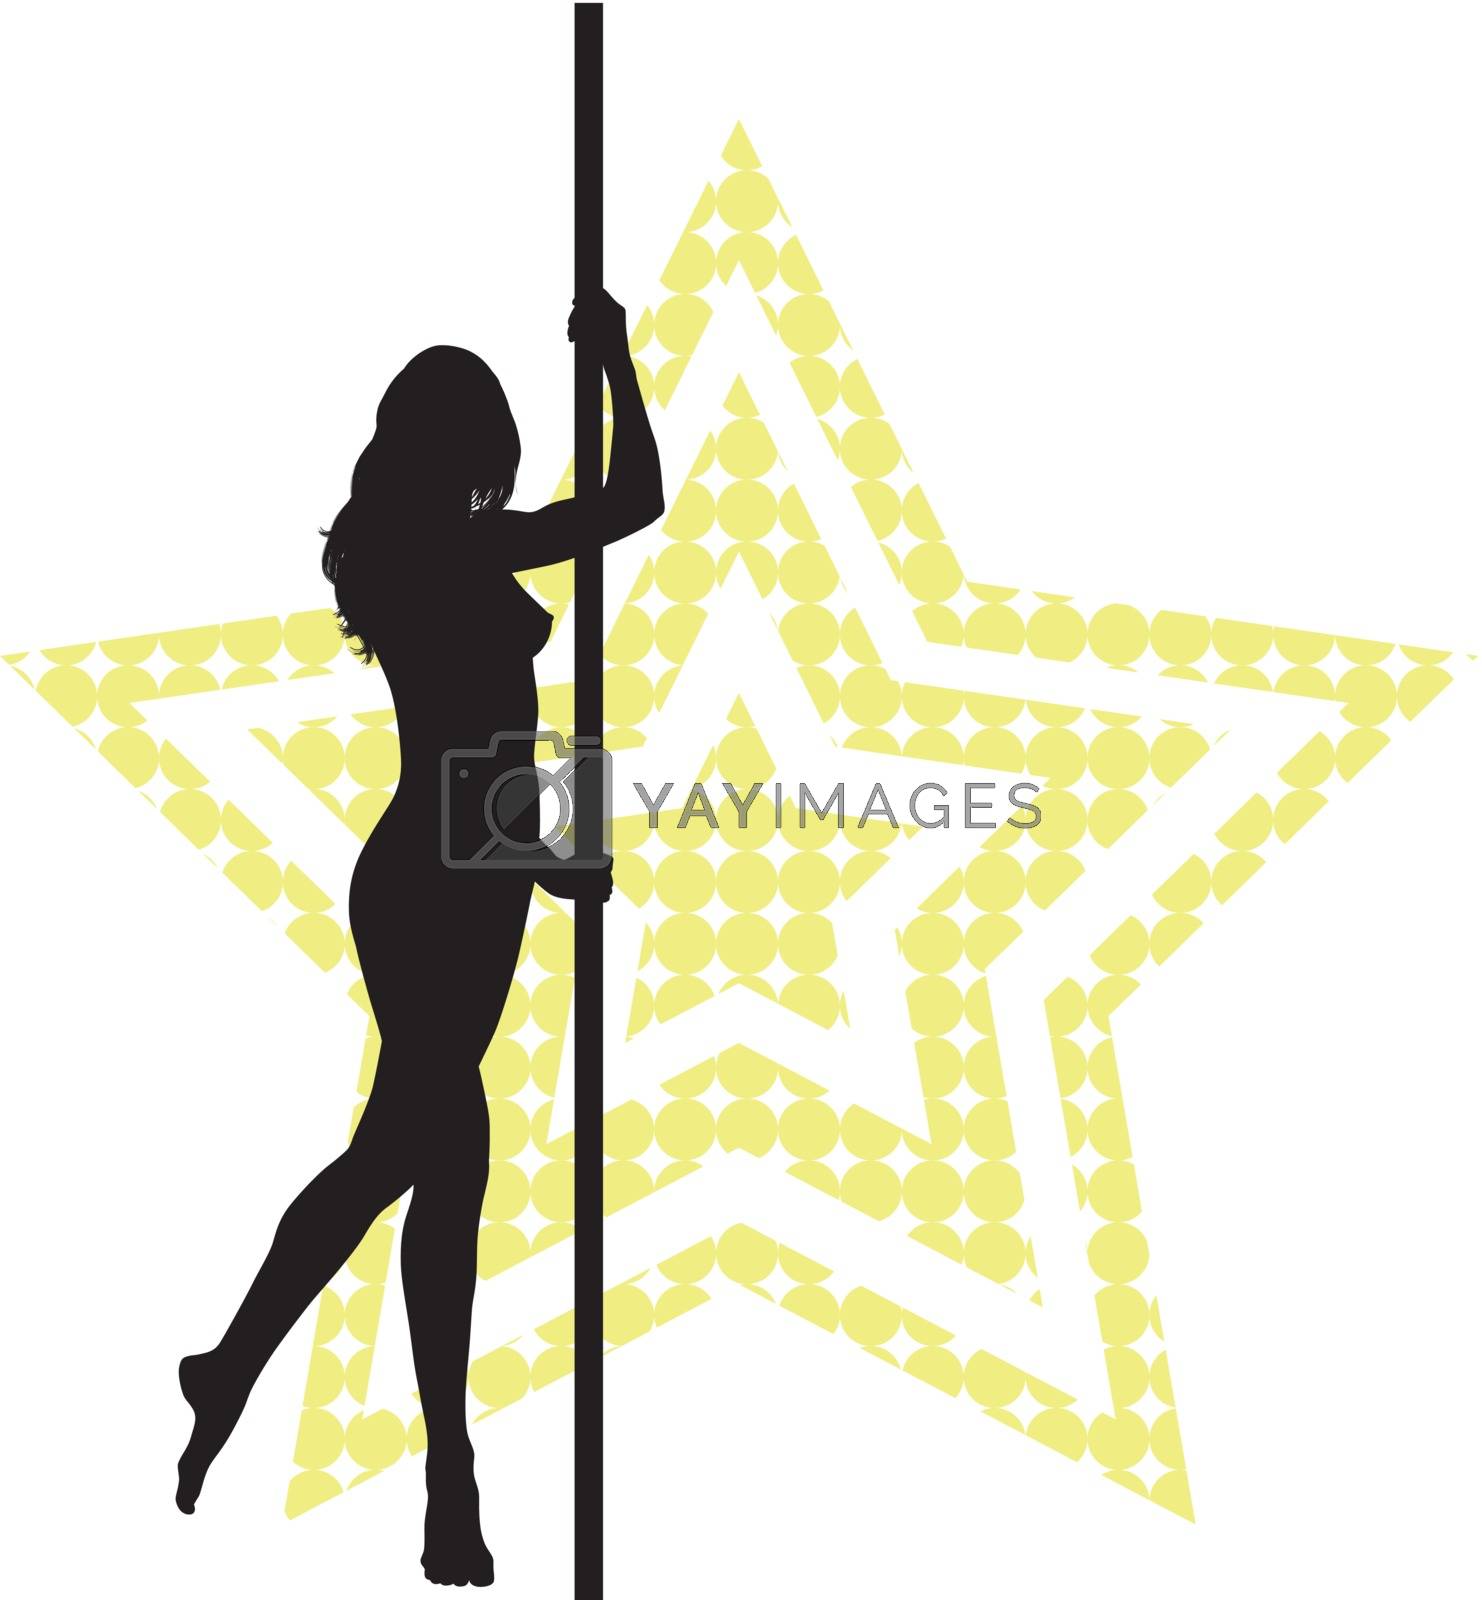 Royalty free image of Pole dancer by vadimmmus